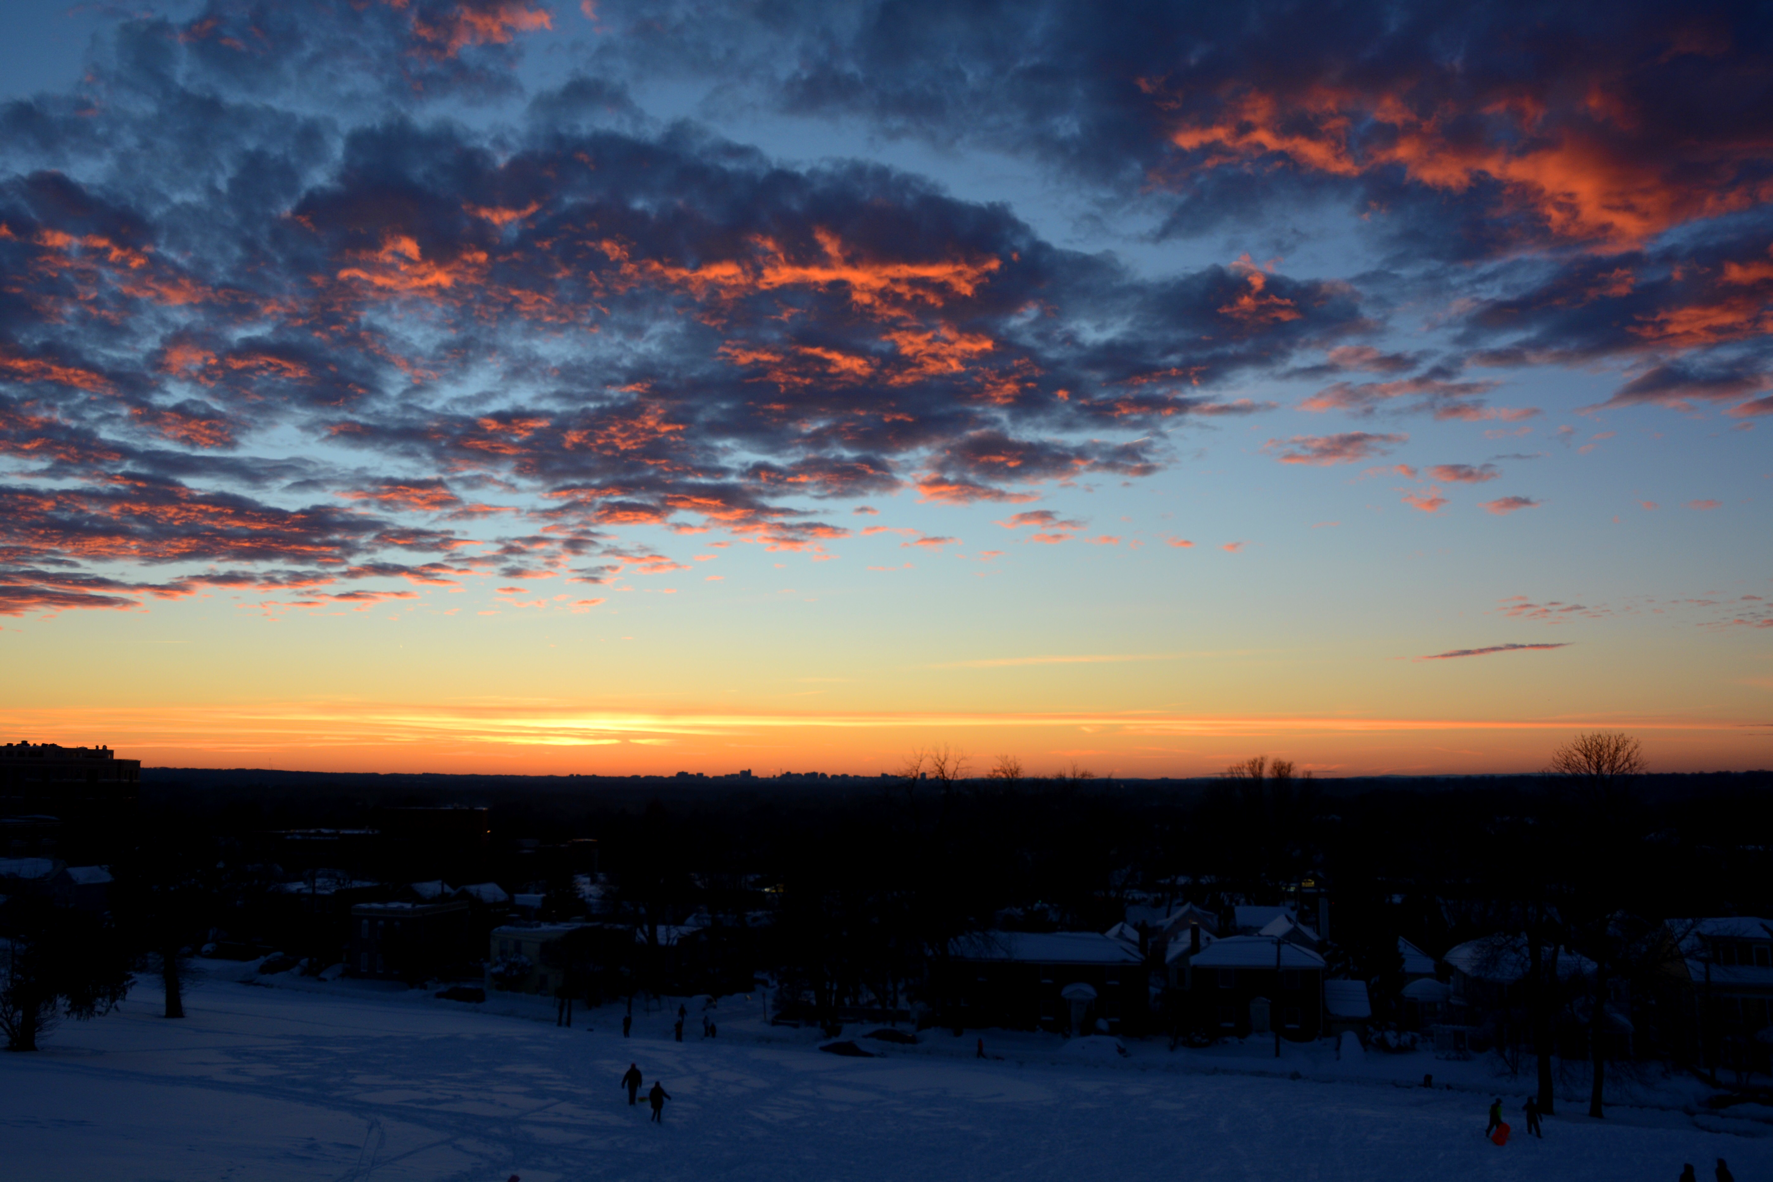 The post-blizzard sunset on Jan. 24, 2016. (WTOP/Dave Dildine)